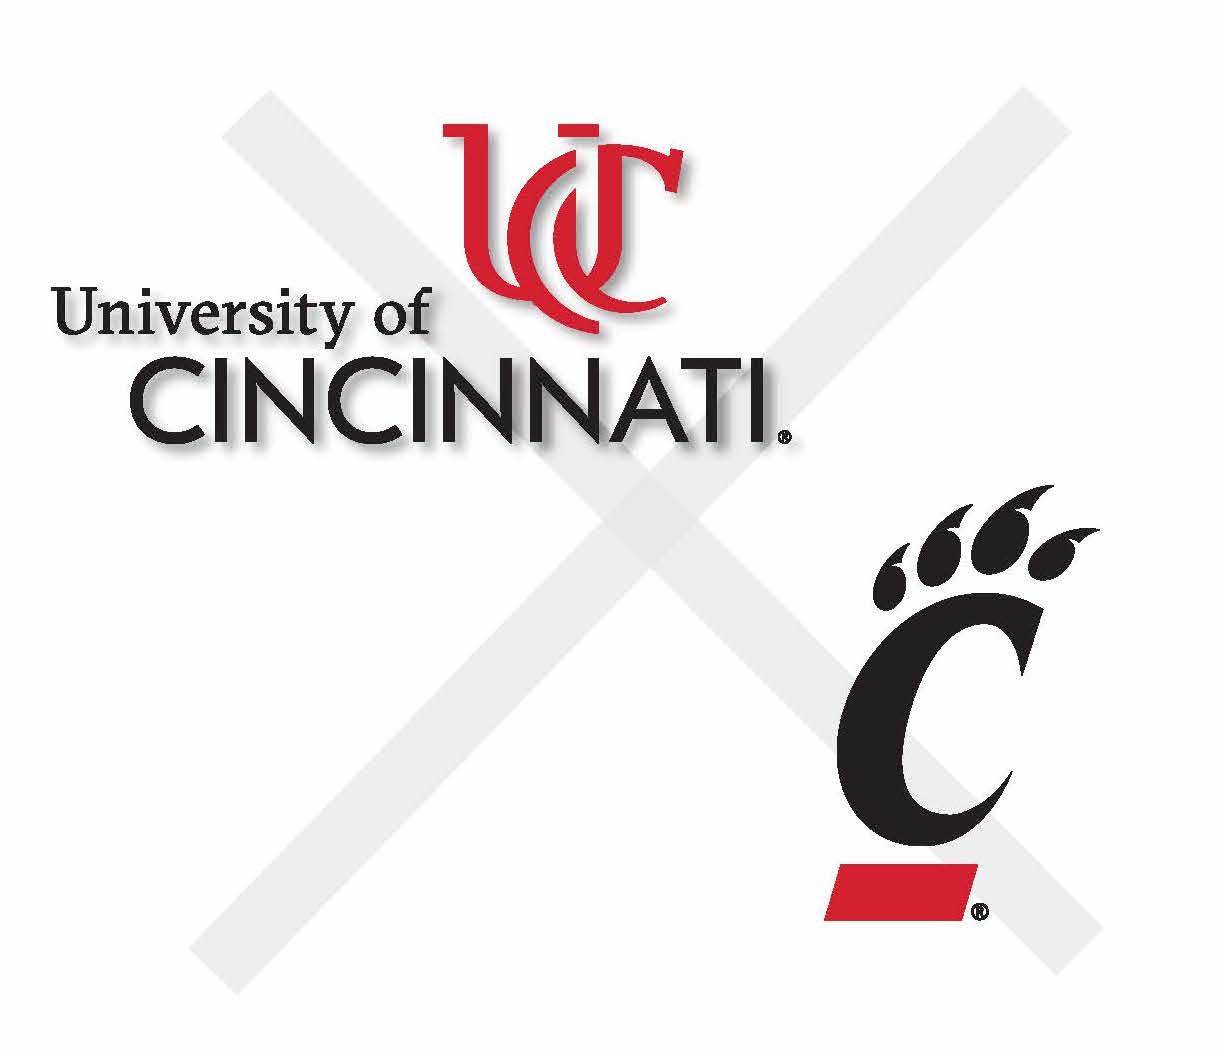 Graphic showing the incorrect use of a University of Cincinnati logo used alongside the University of Cincinnati Athletics logo